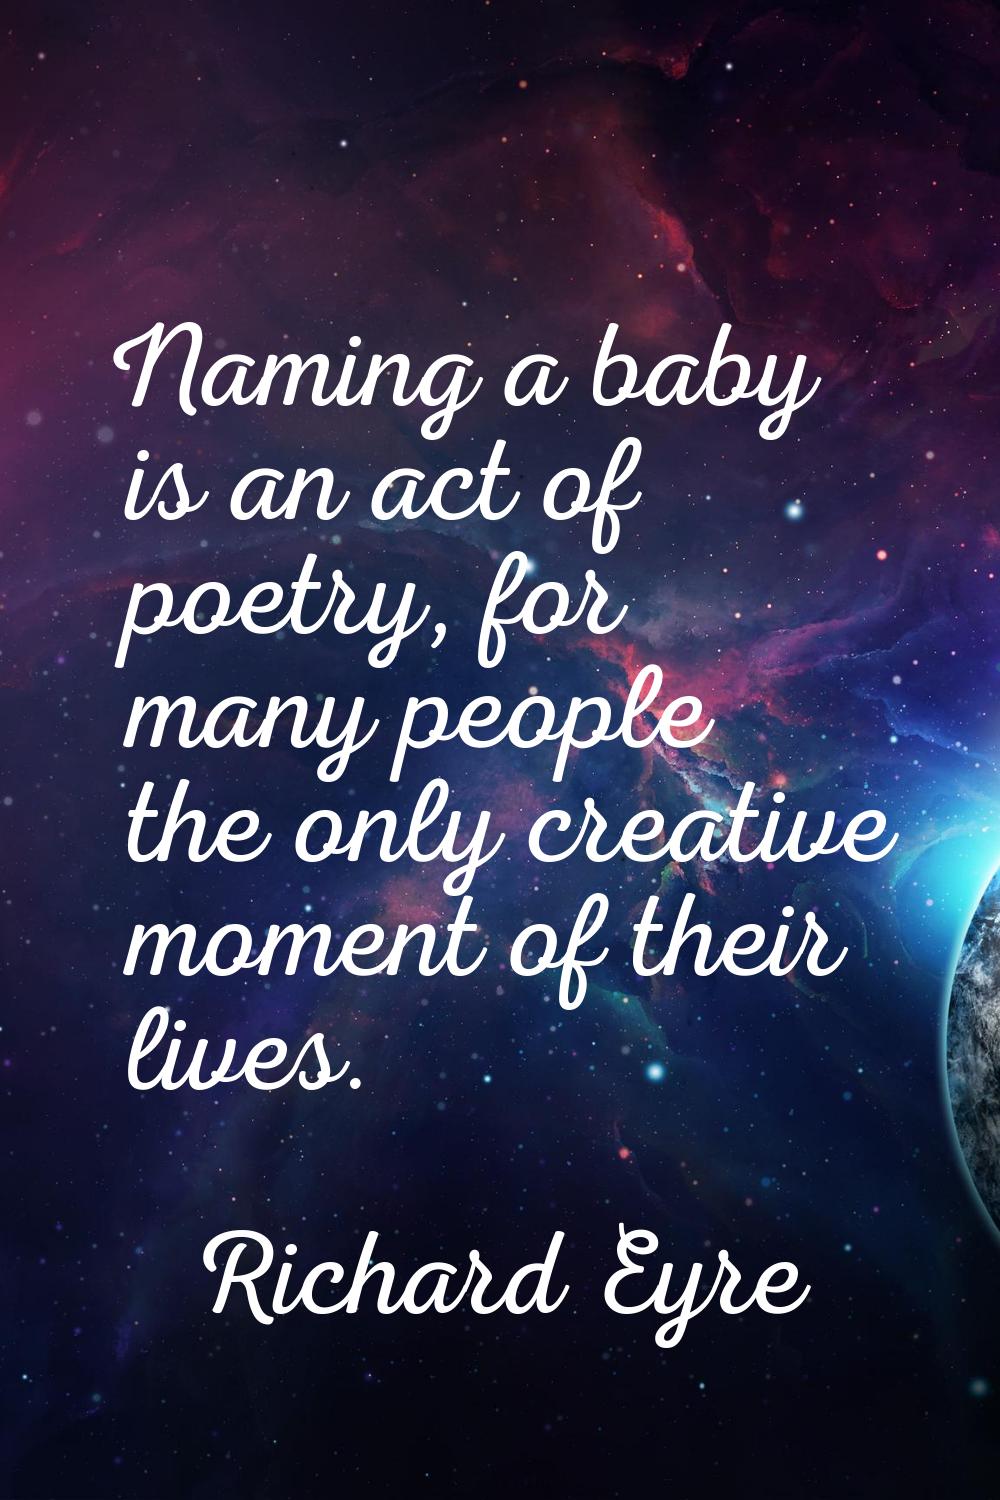 Naming a baby is an act of poetry, for many people the only creative moment of their lives.